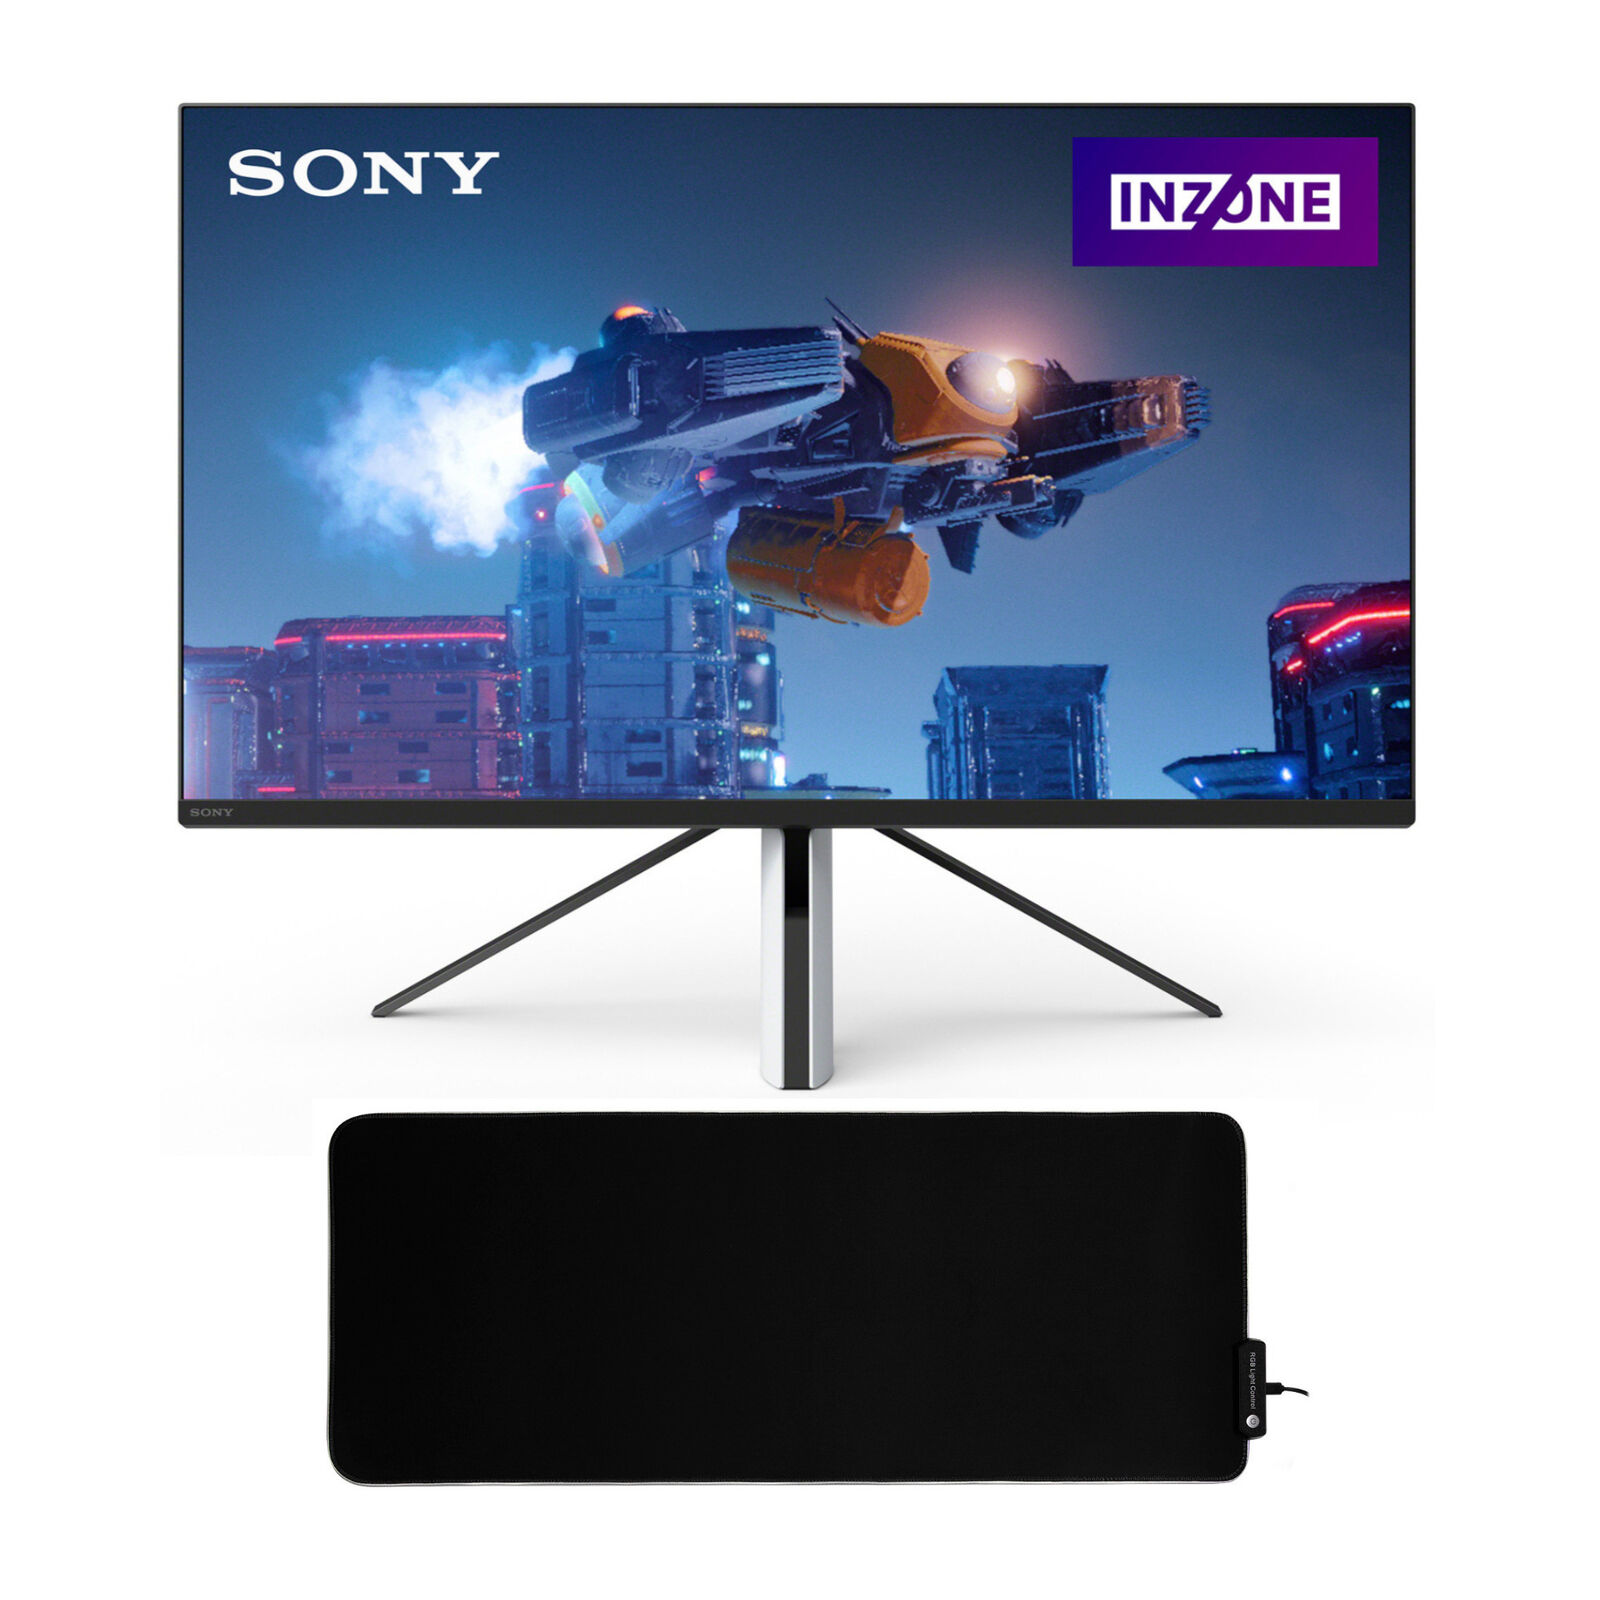 Sony 27 In INZONE M3 Full HD HDR 240Hz Gaming Monitor with RGB Mouse Pad